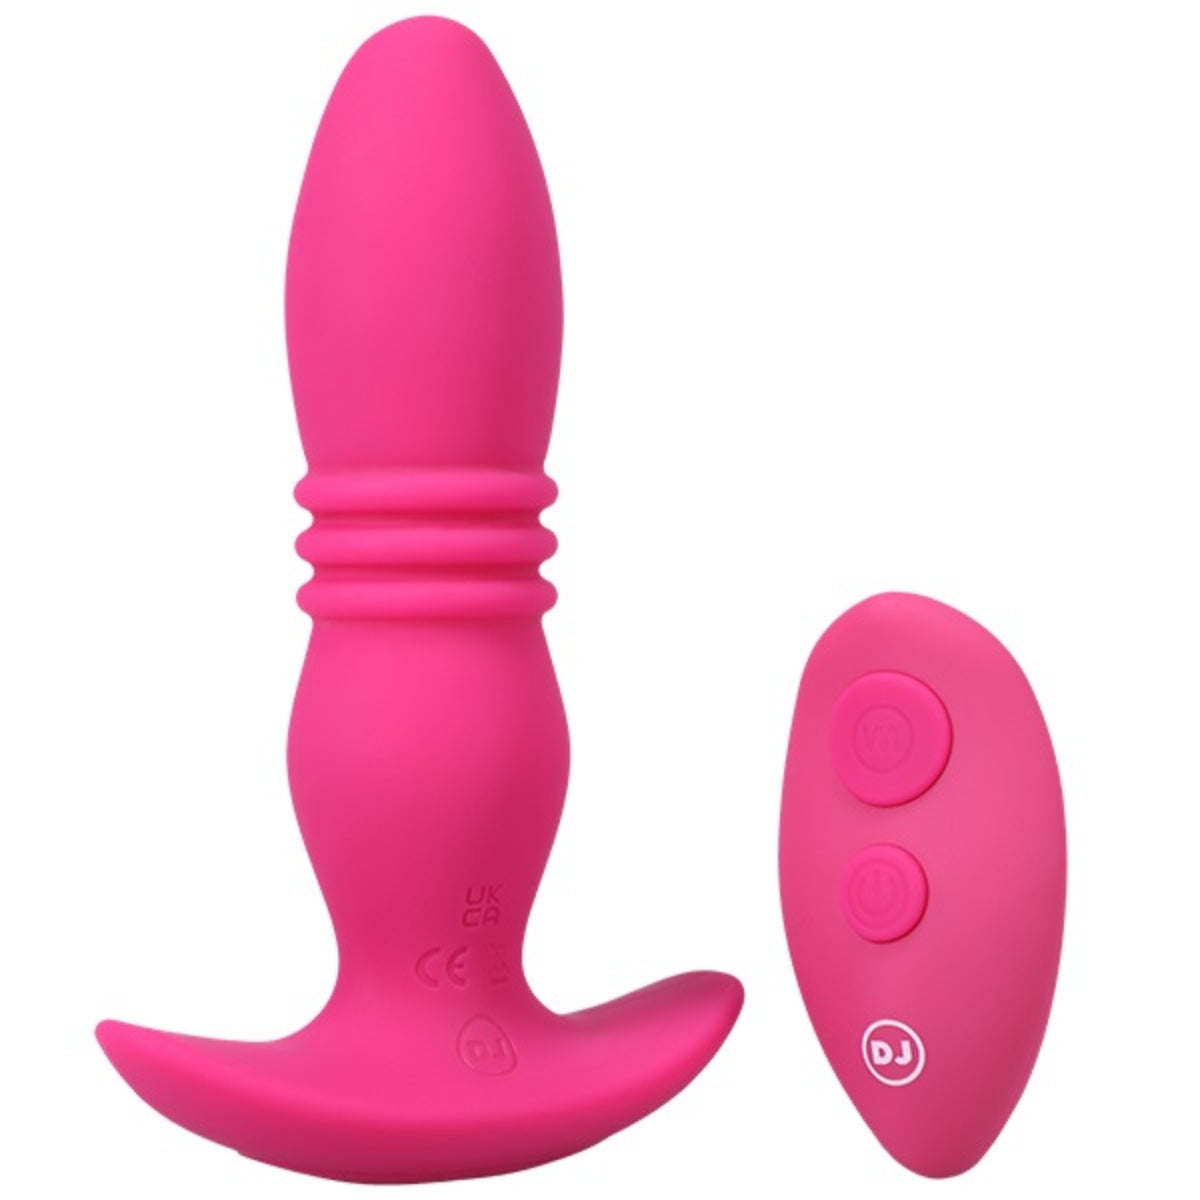 A-Play Rise Rechargeable Remote Control Silicone Butt Plug Pink 6.25 Inch